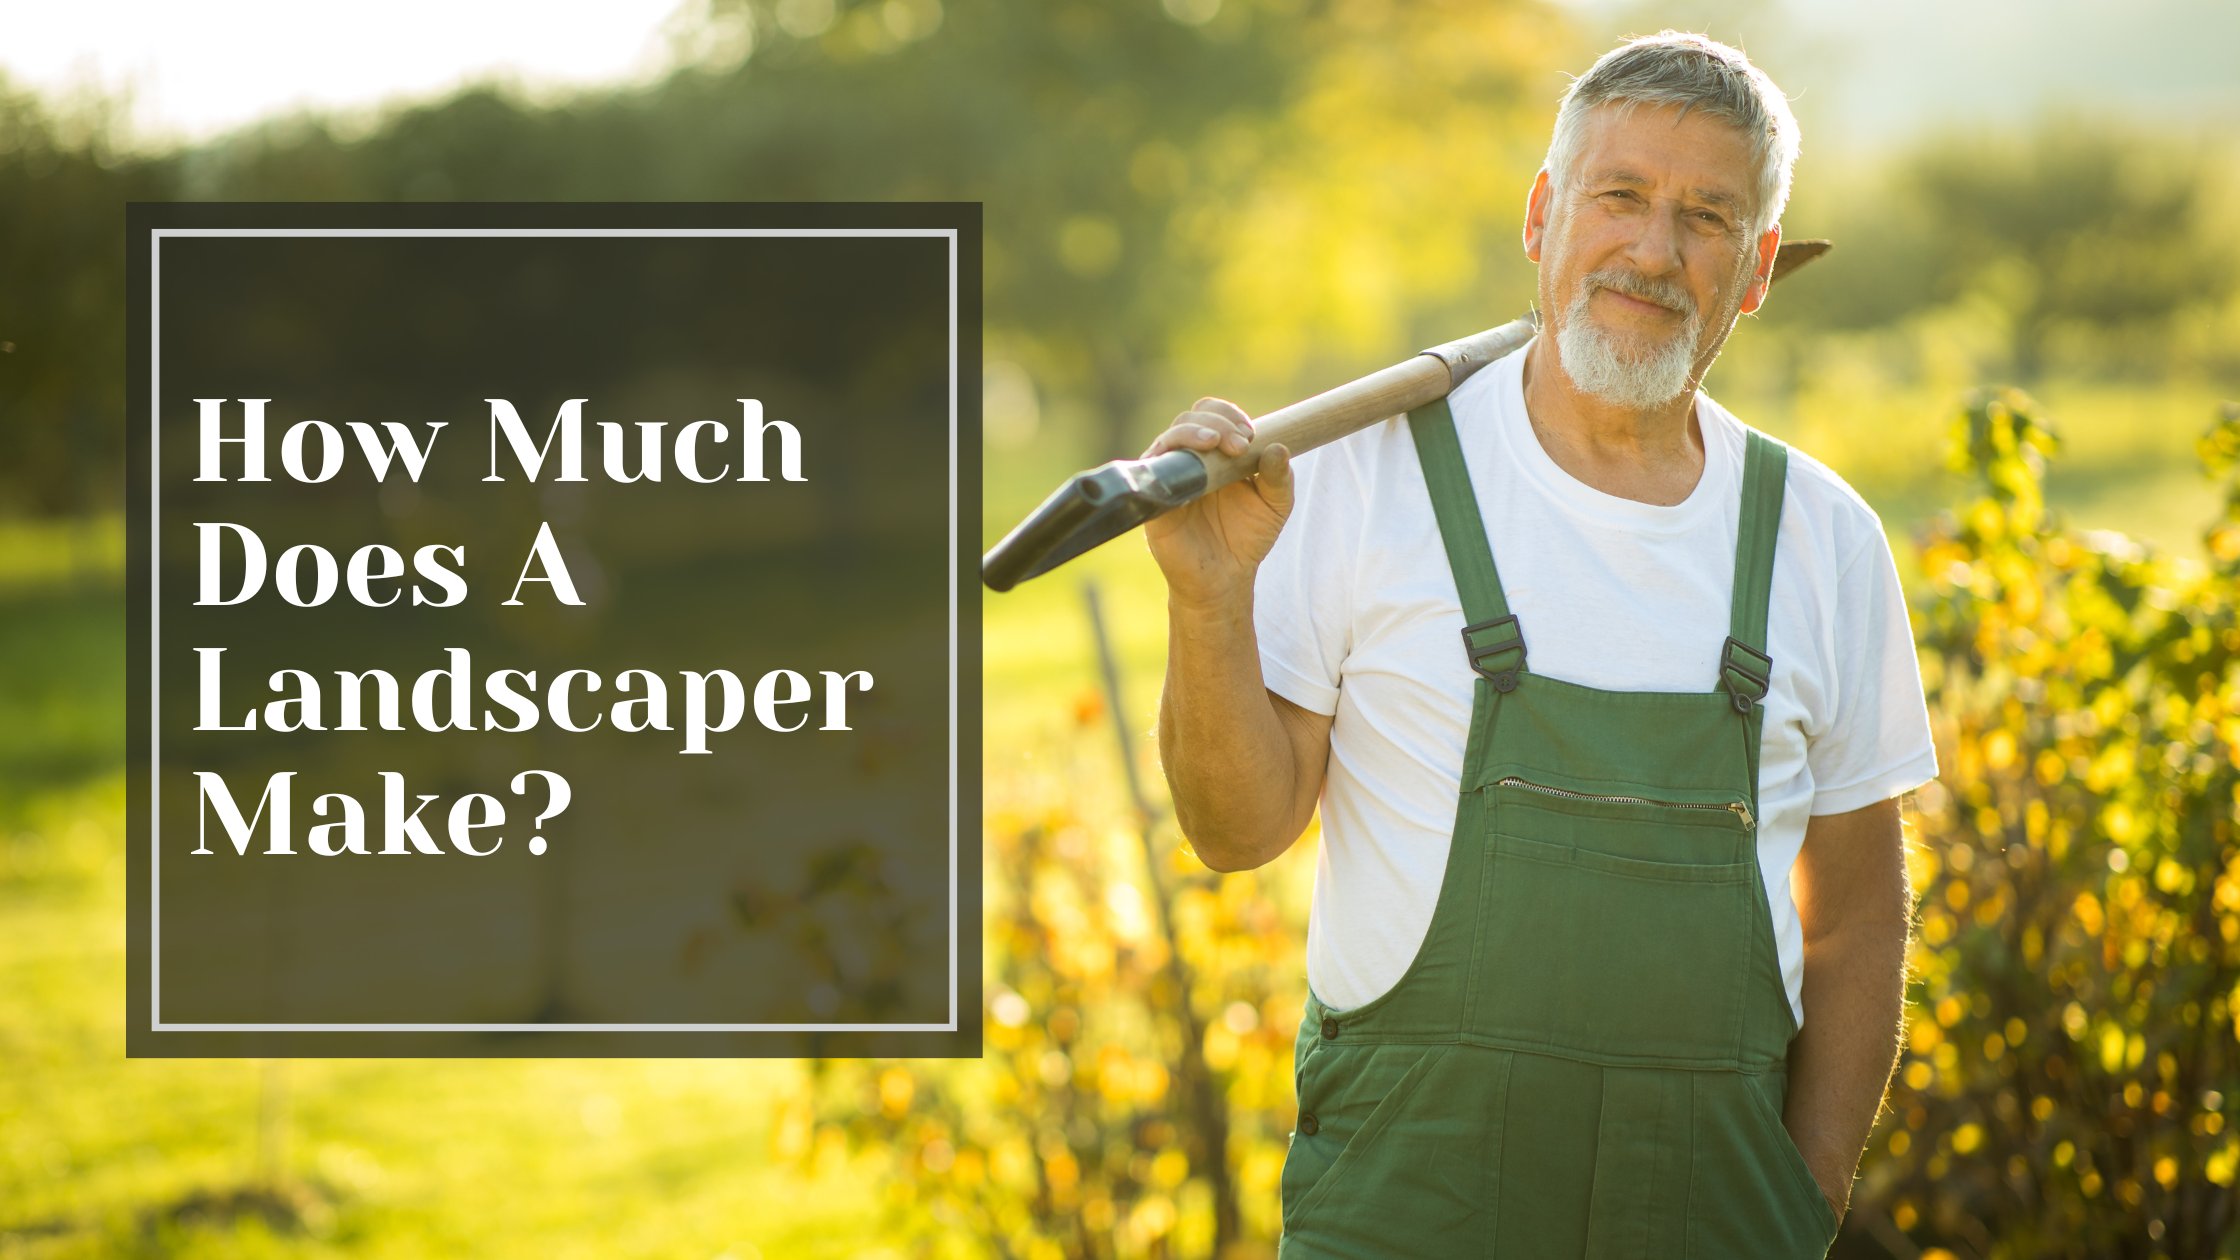 How Much Does A Landscaper Make?